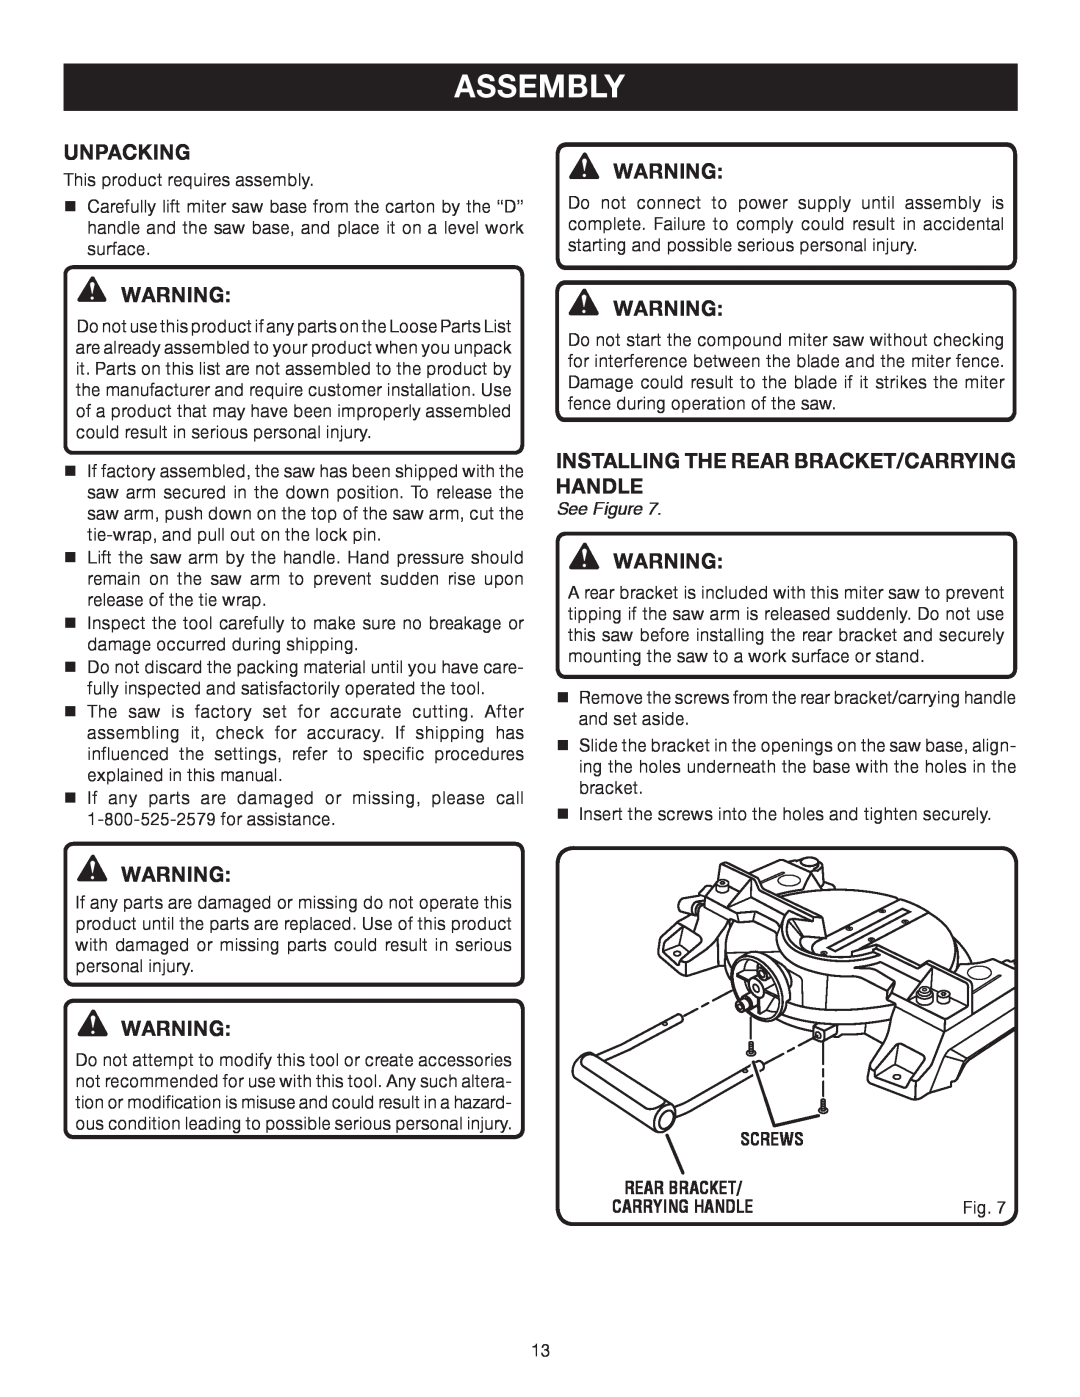 Ryobi TS1141 manual Assembly, Unpacking, installing the rear bracket/carrying handle, See Figure 